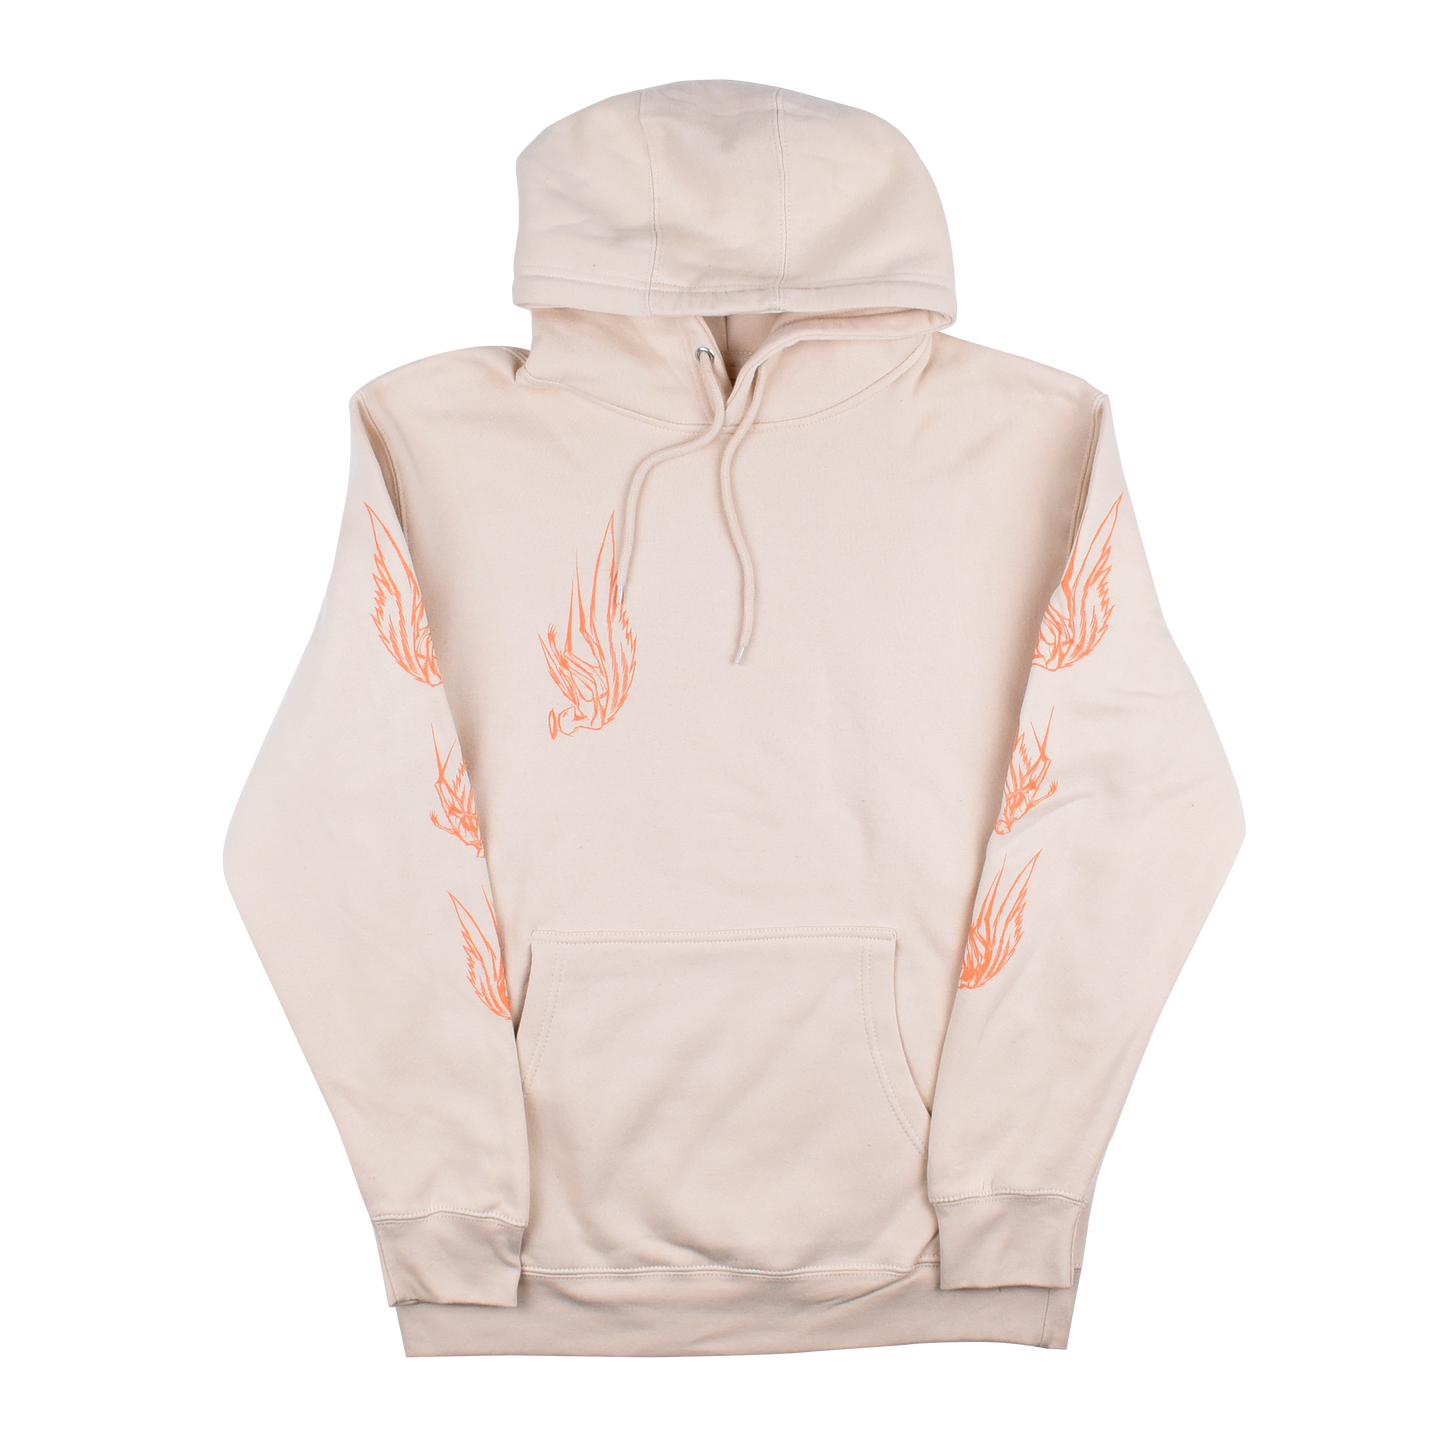 any means necessary shawn coss hel pullover hoodie sandshell front